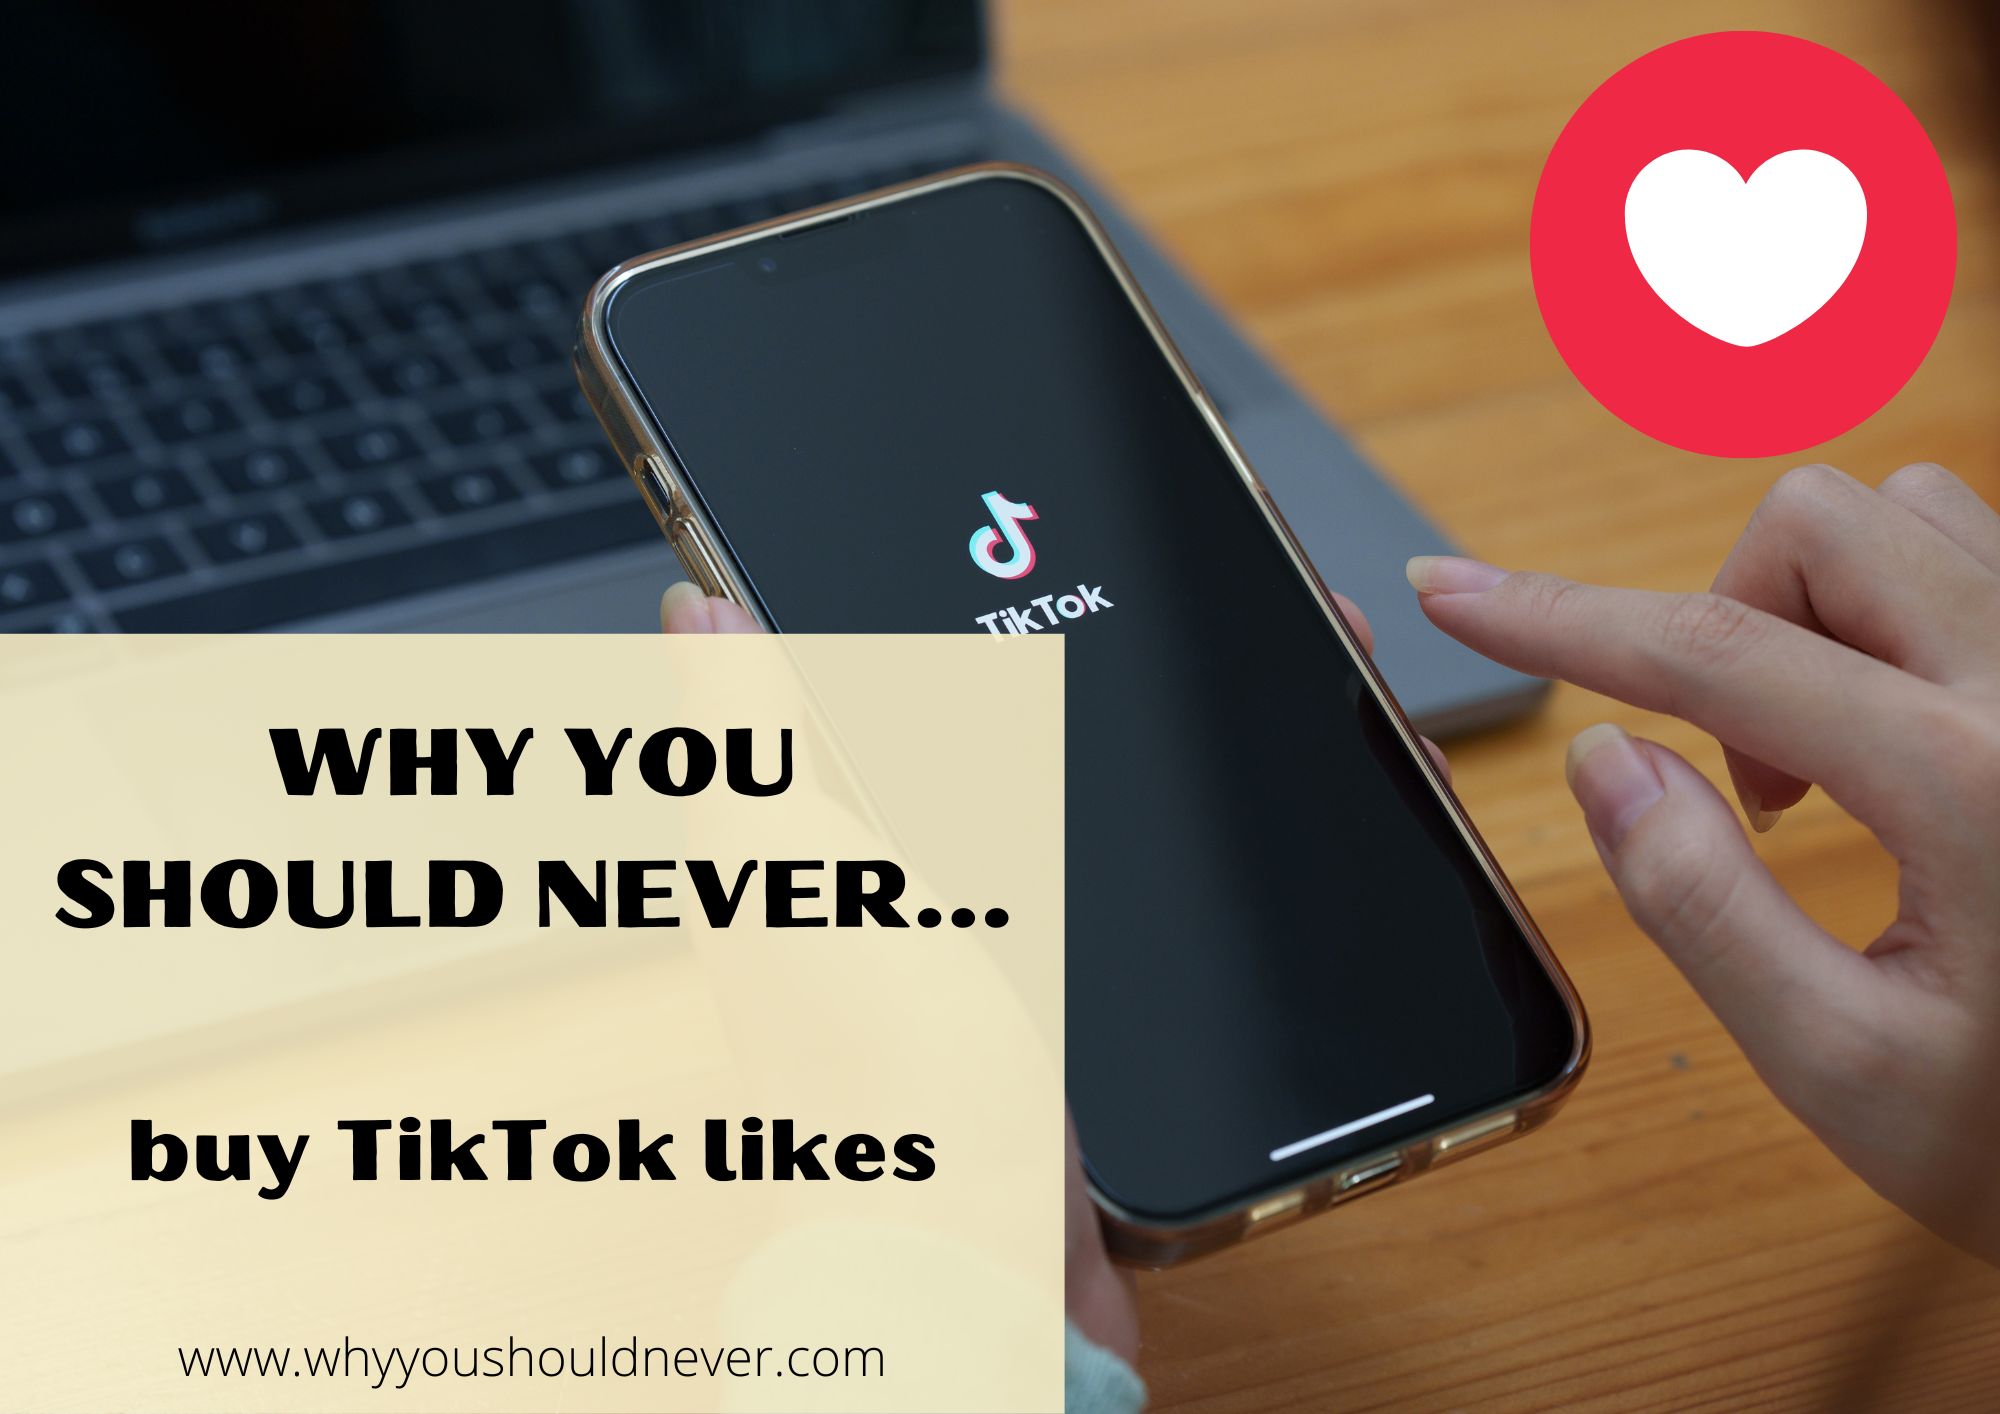 Why You Should Never Buy TikTok Likes